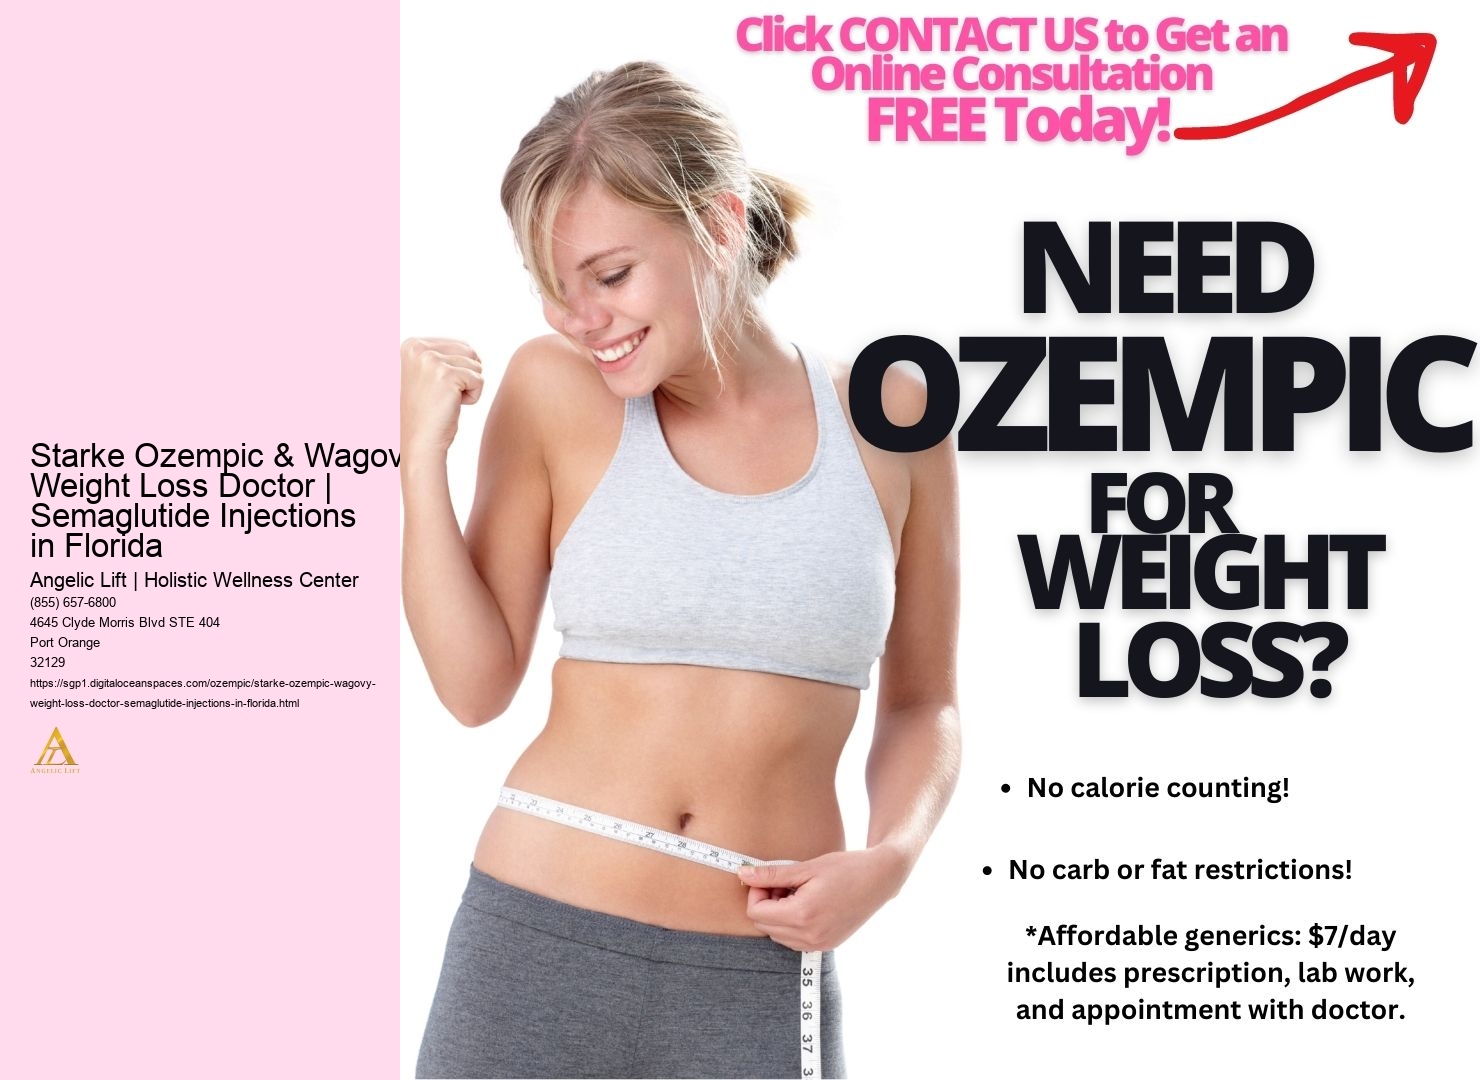 Starke Ozempic & Wagovy Weight Loss Doctor | Semaglutide Injections in Florida